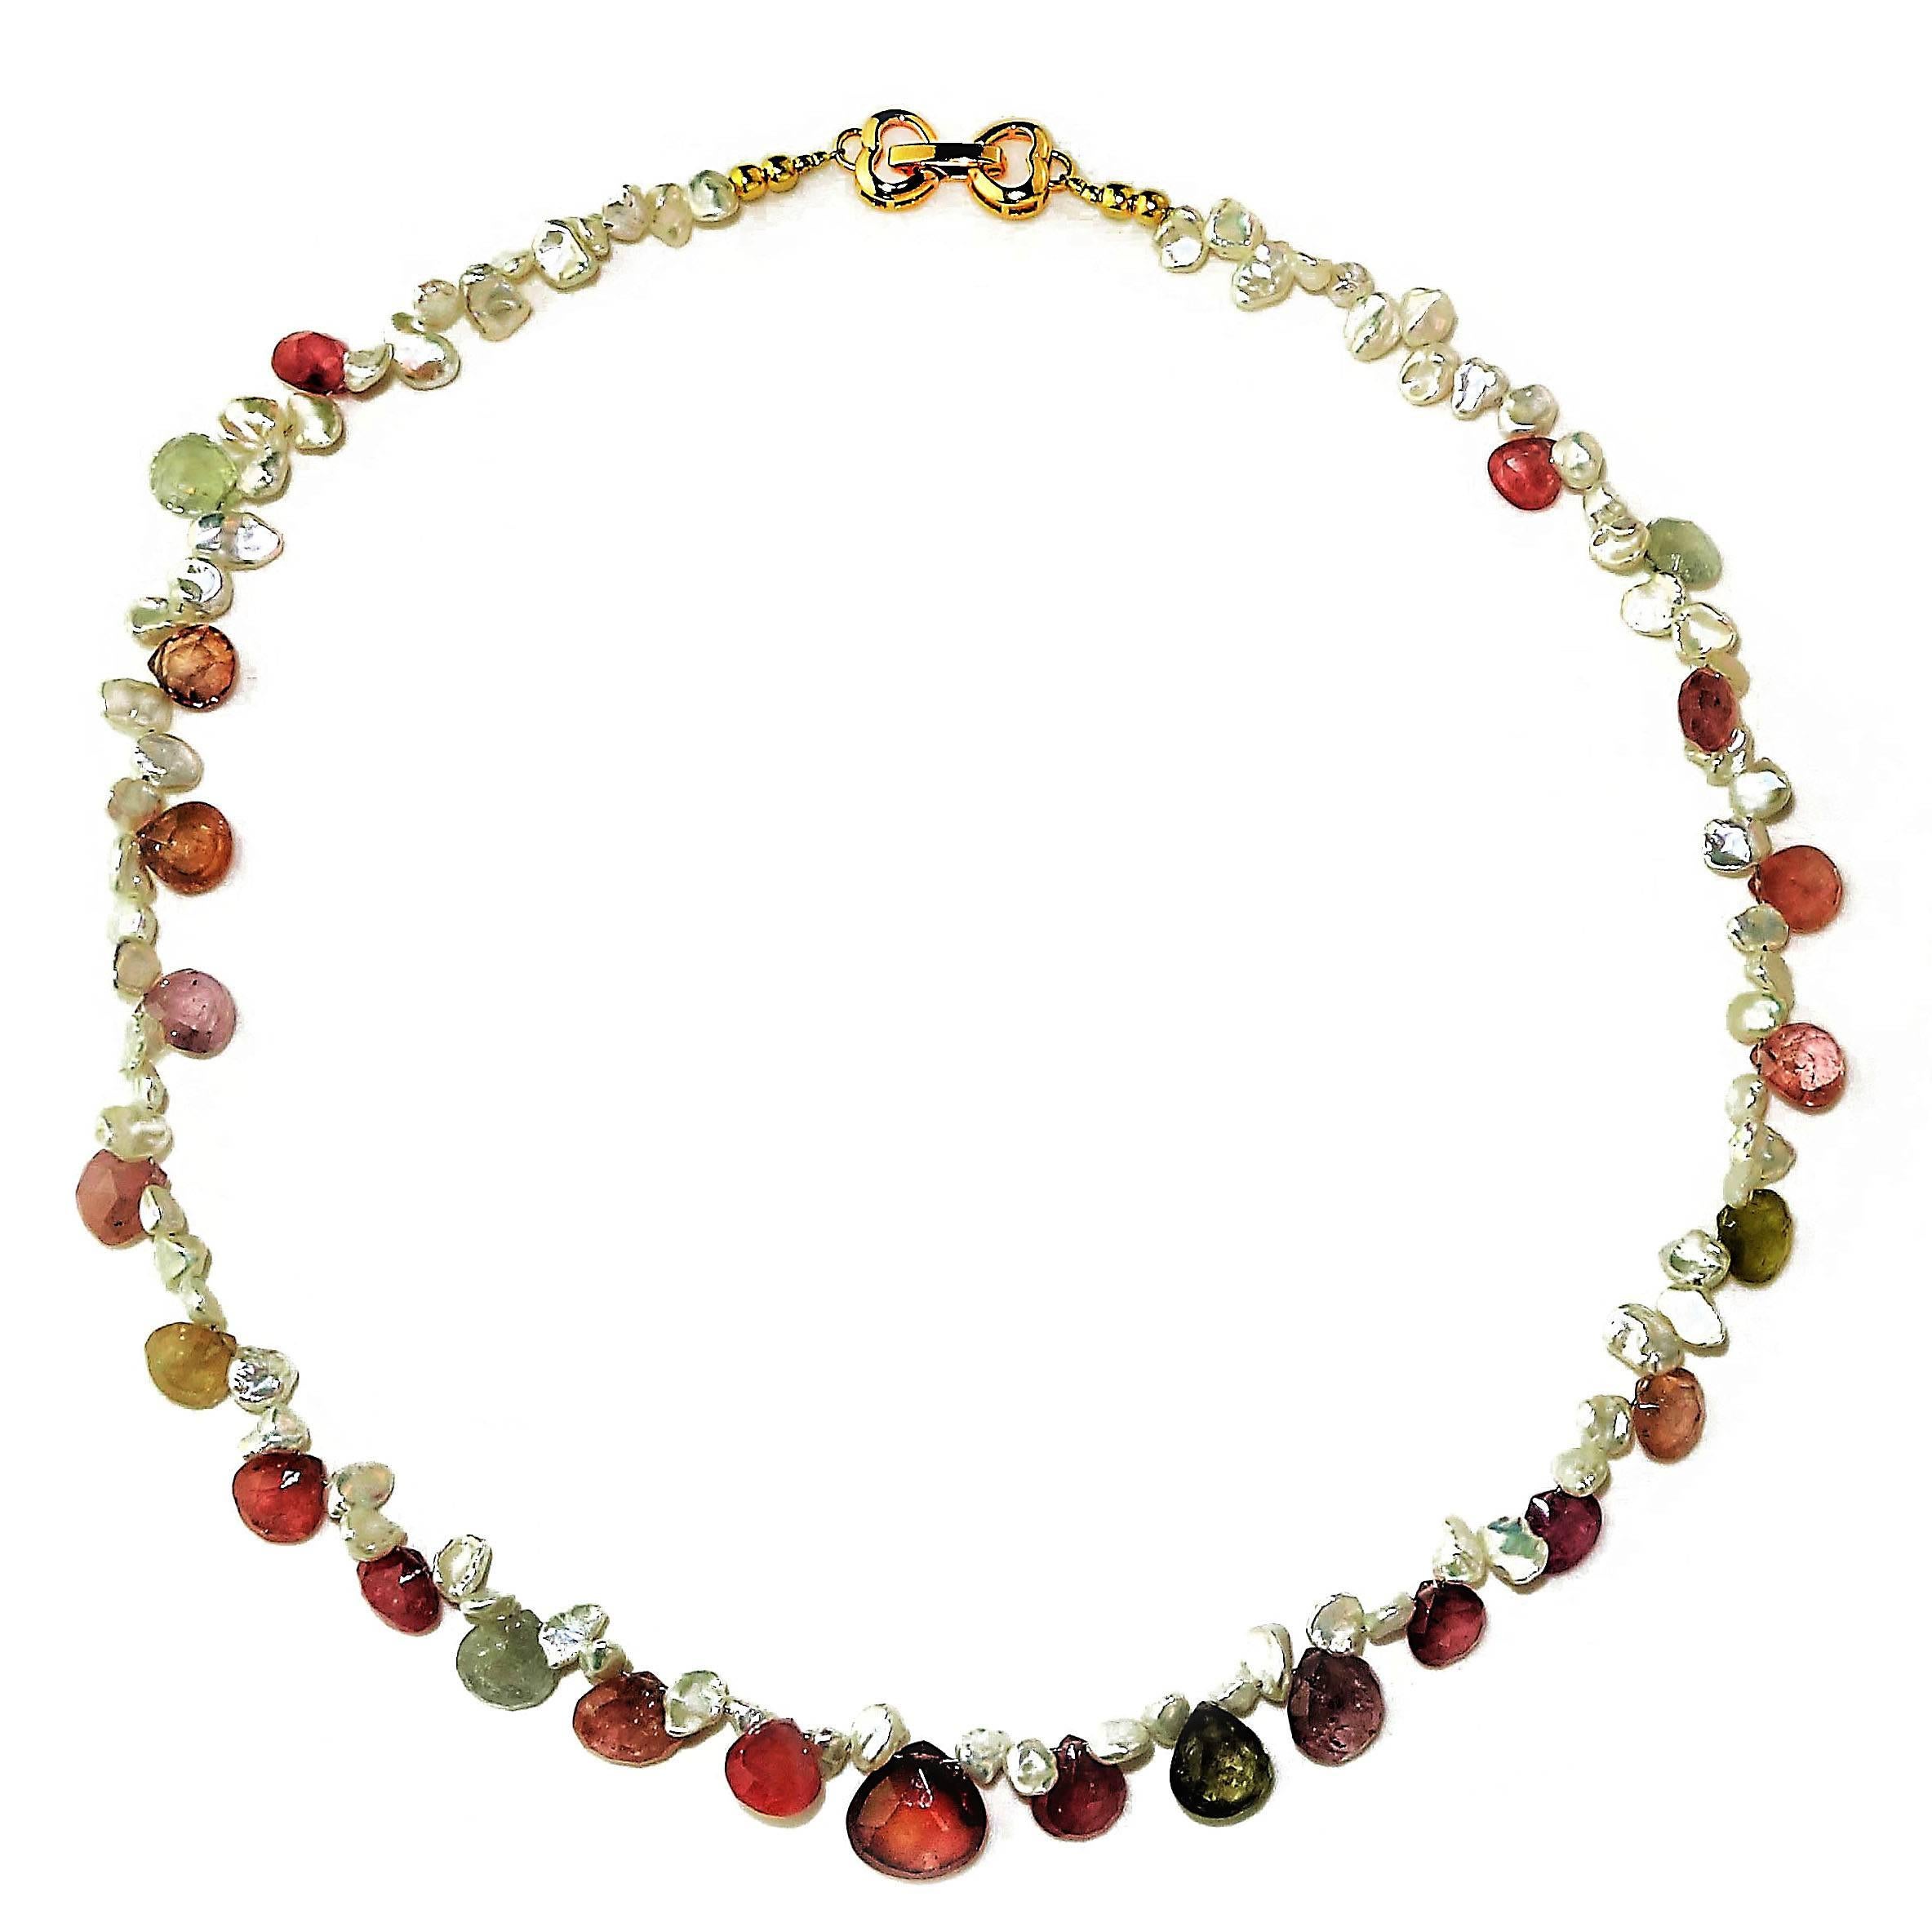 Custom made 17 Inch Choker Necklace of Graduated fat Pear shaped Sapphire Briolettes and delicate freshwater white keshi pearls. The Sapphires are graduated from 6mm to 11mm and are in shades of pink, light green, and clear. They have all the